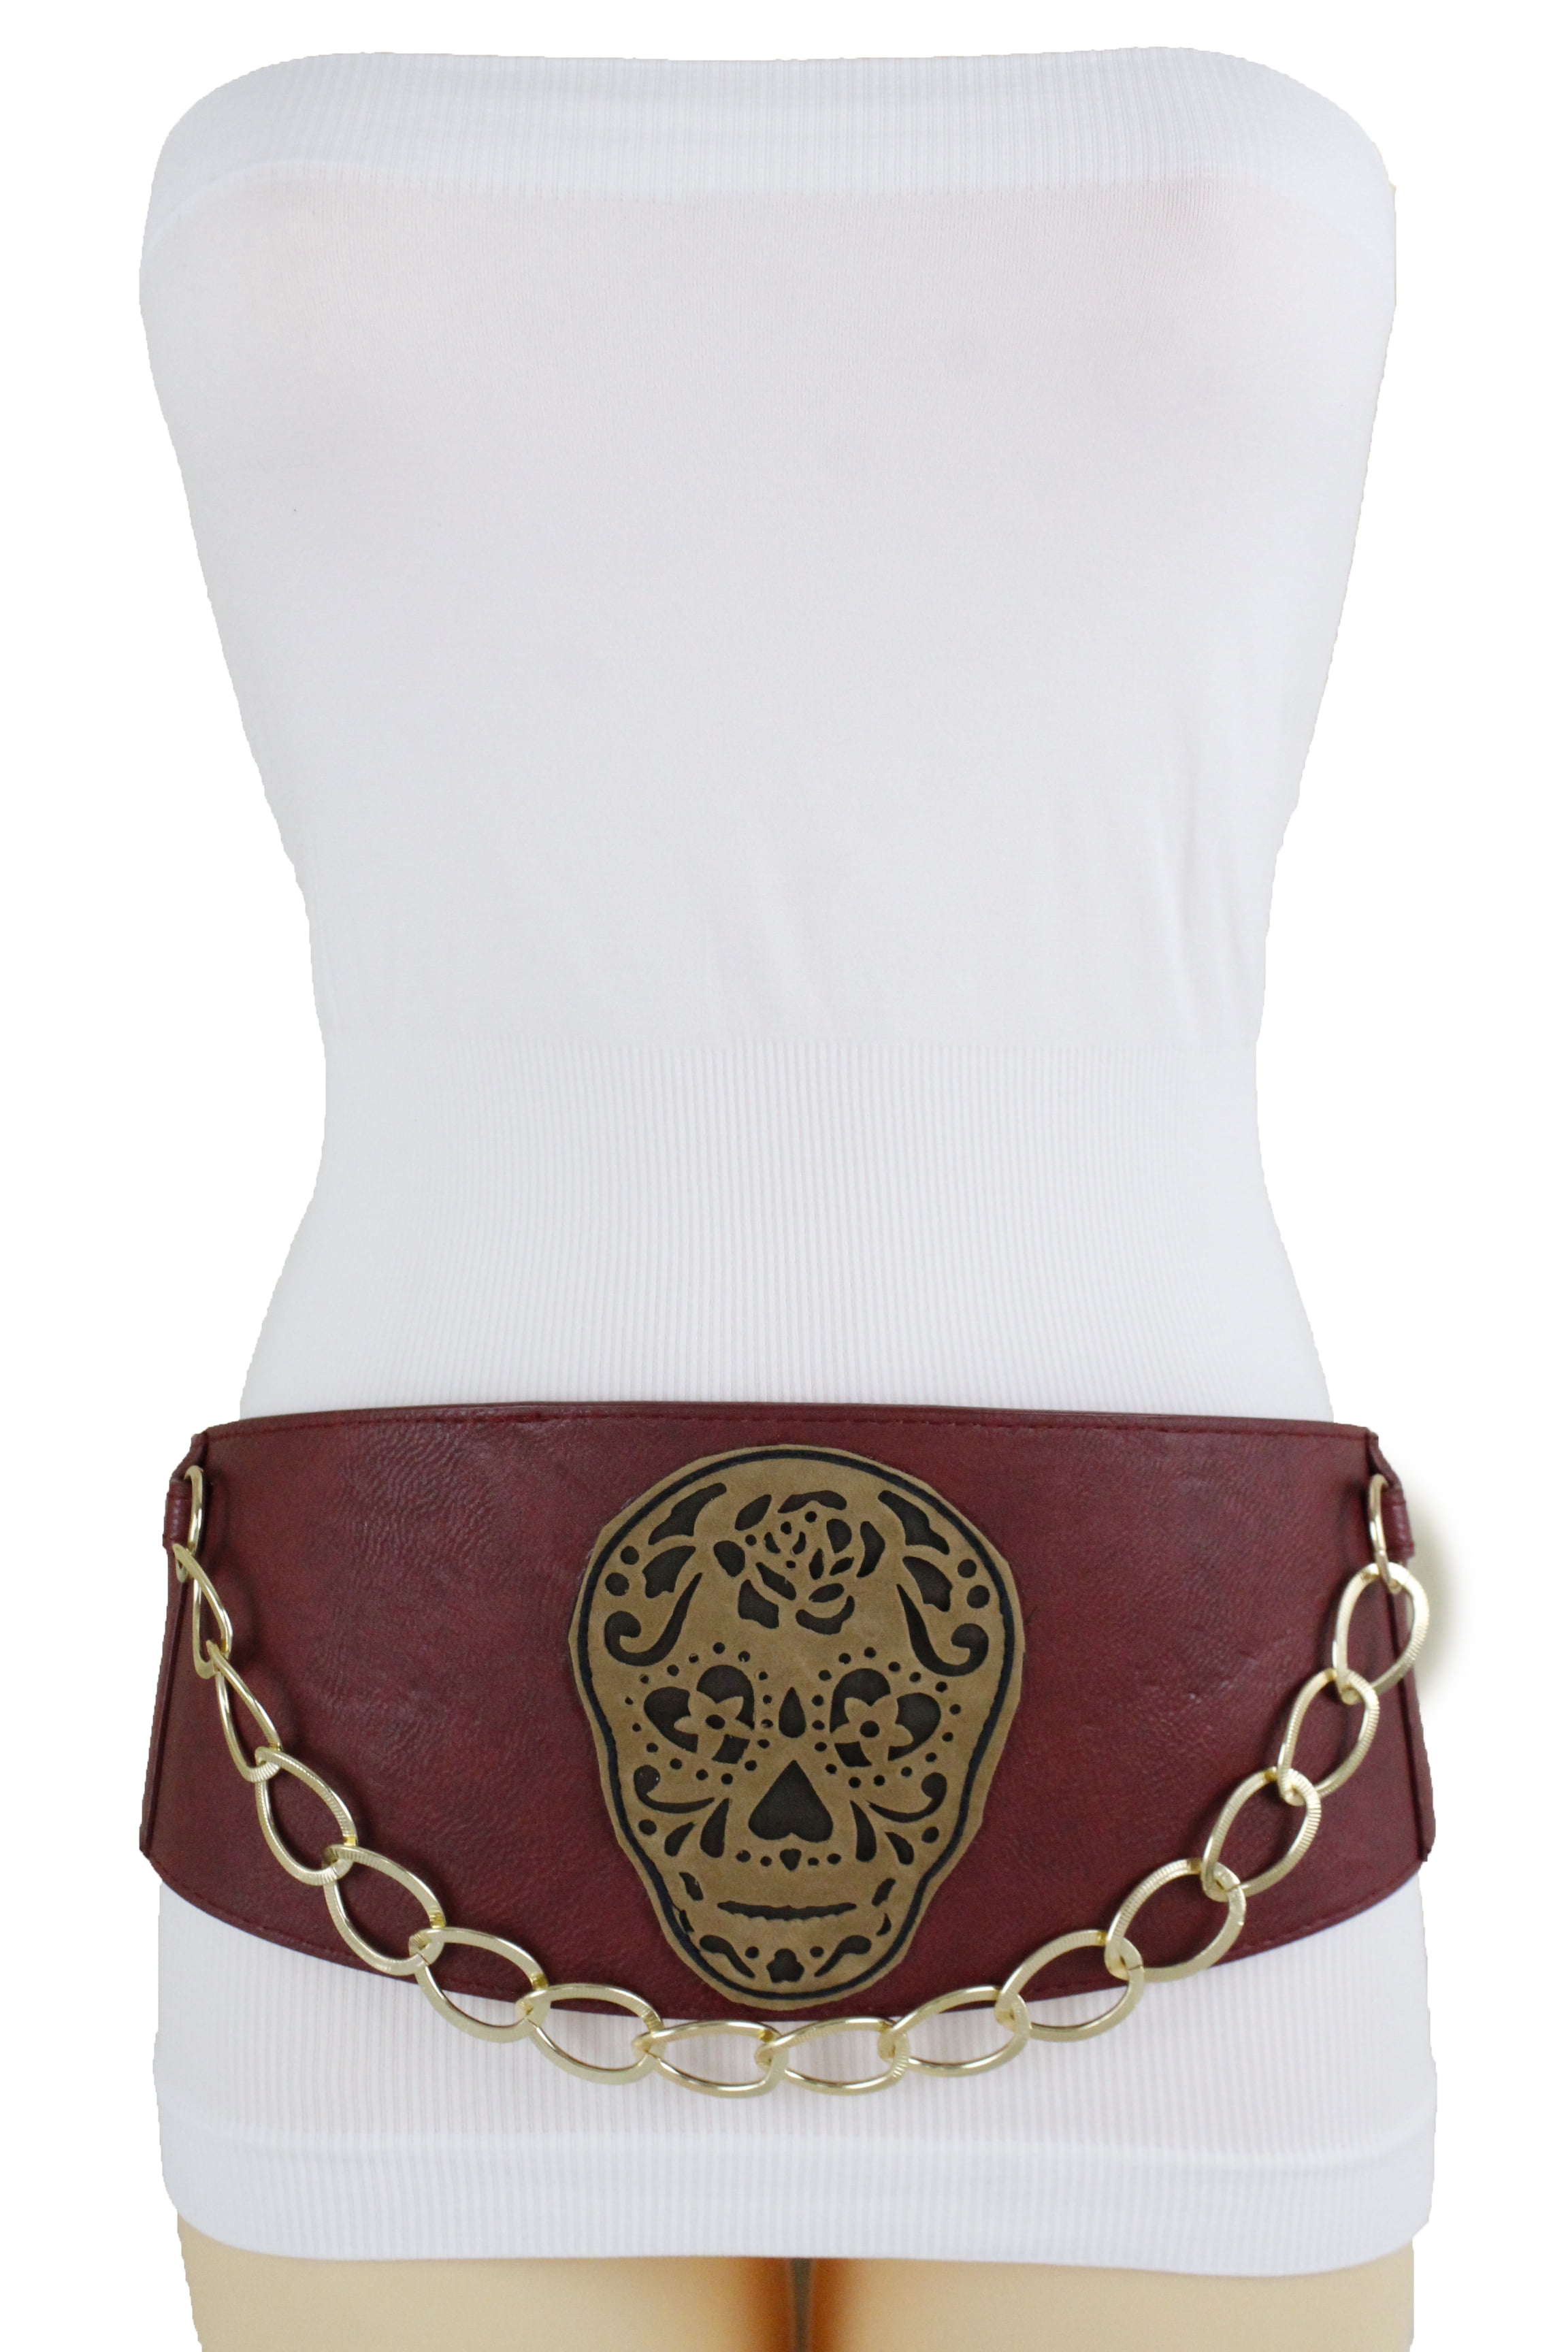 New Women Fashion Belt Hip High Waist Elastic Band Faux Leather Red Size XS S M 